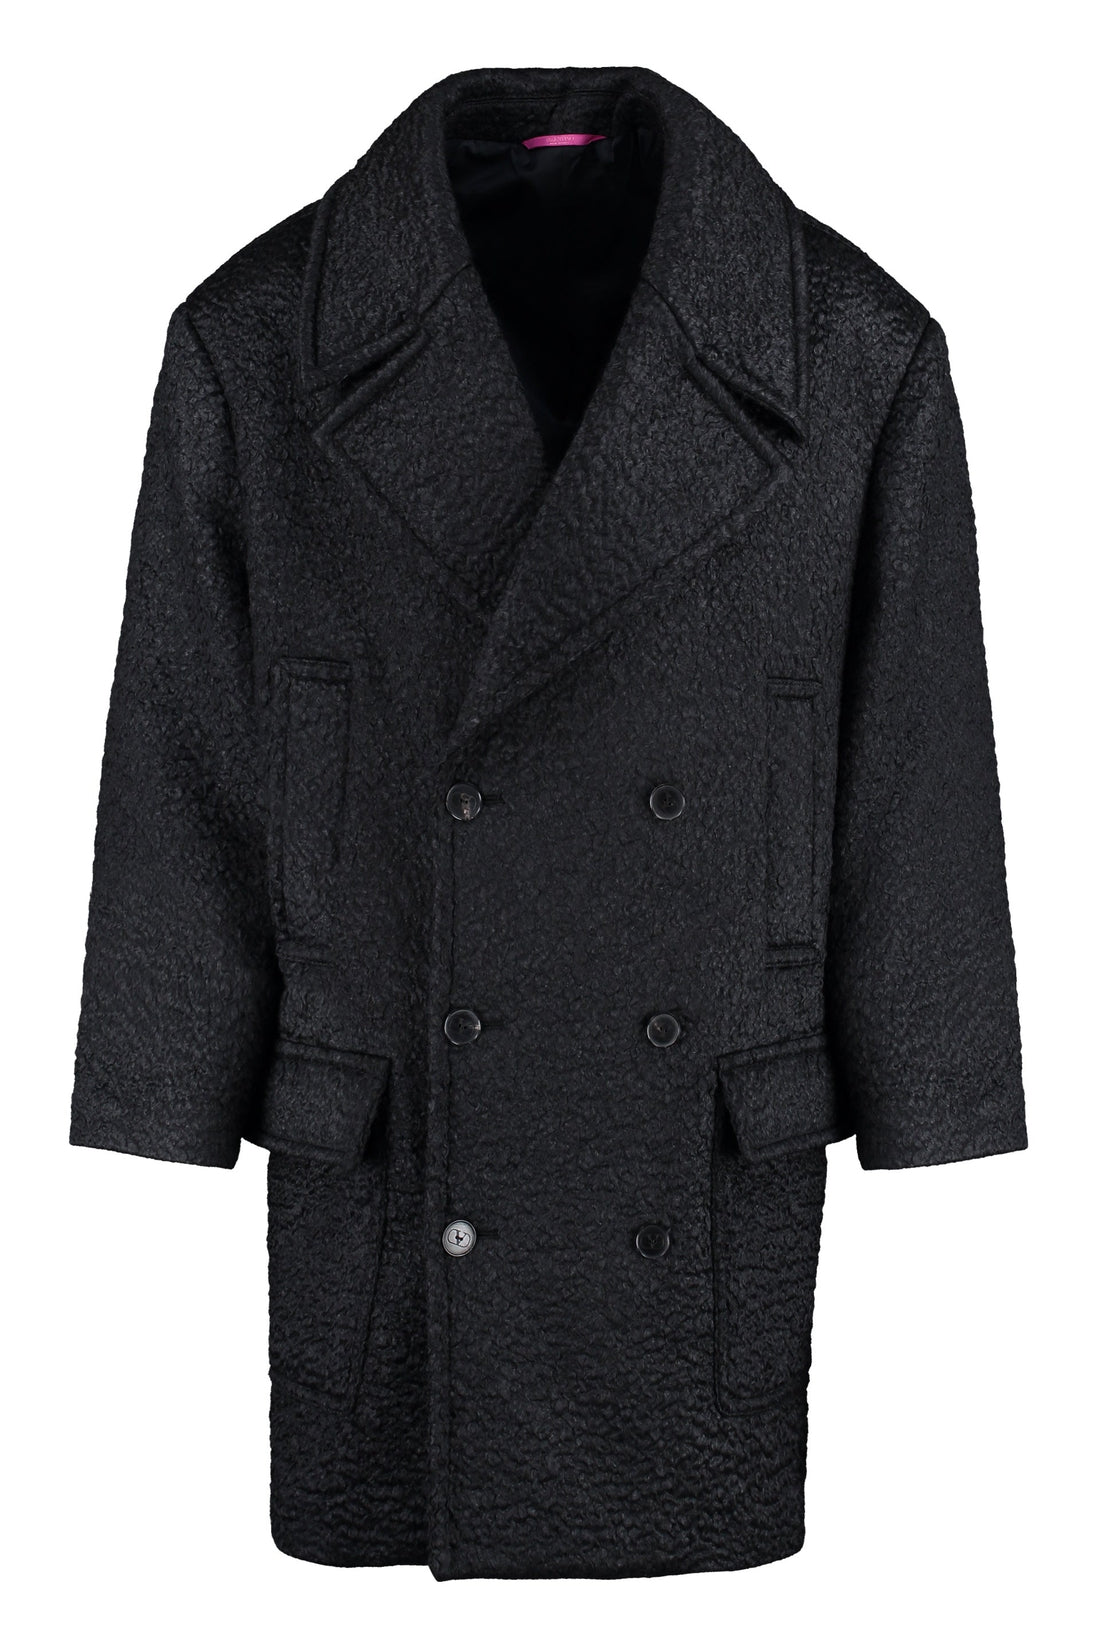 Valentino-OUTLET-SALE-Wool blend double-breasted coat-ARCHIVIST